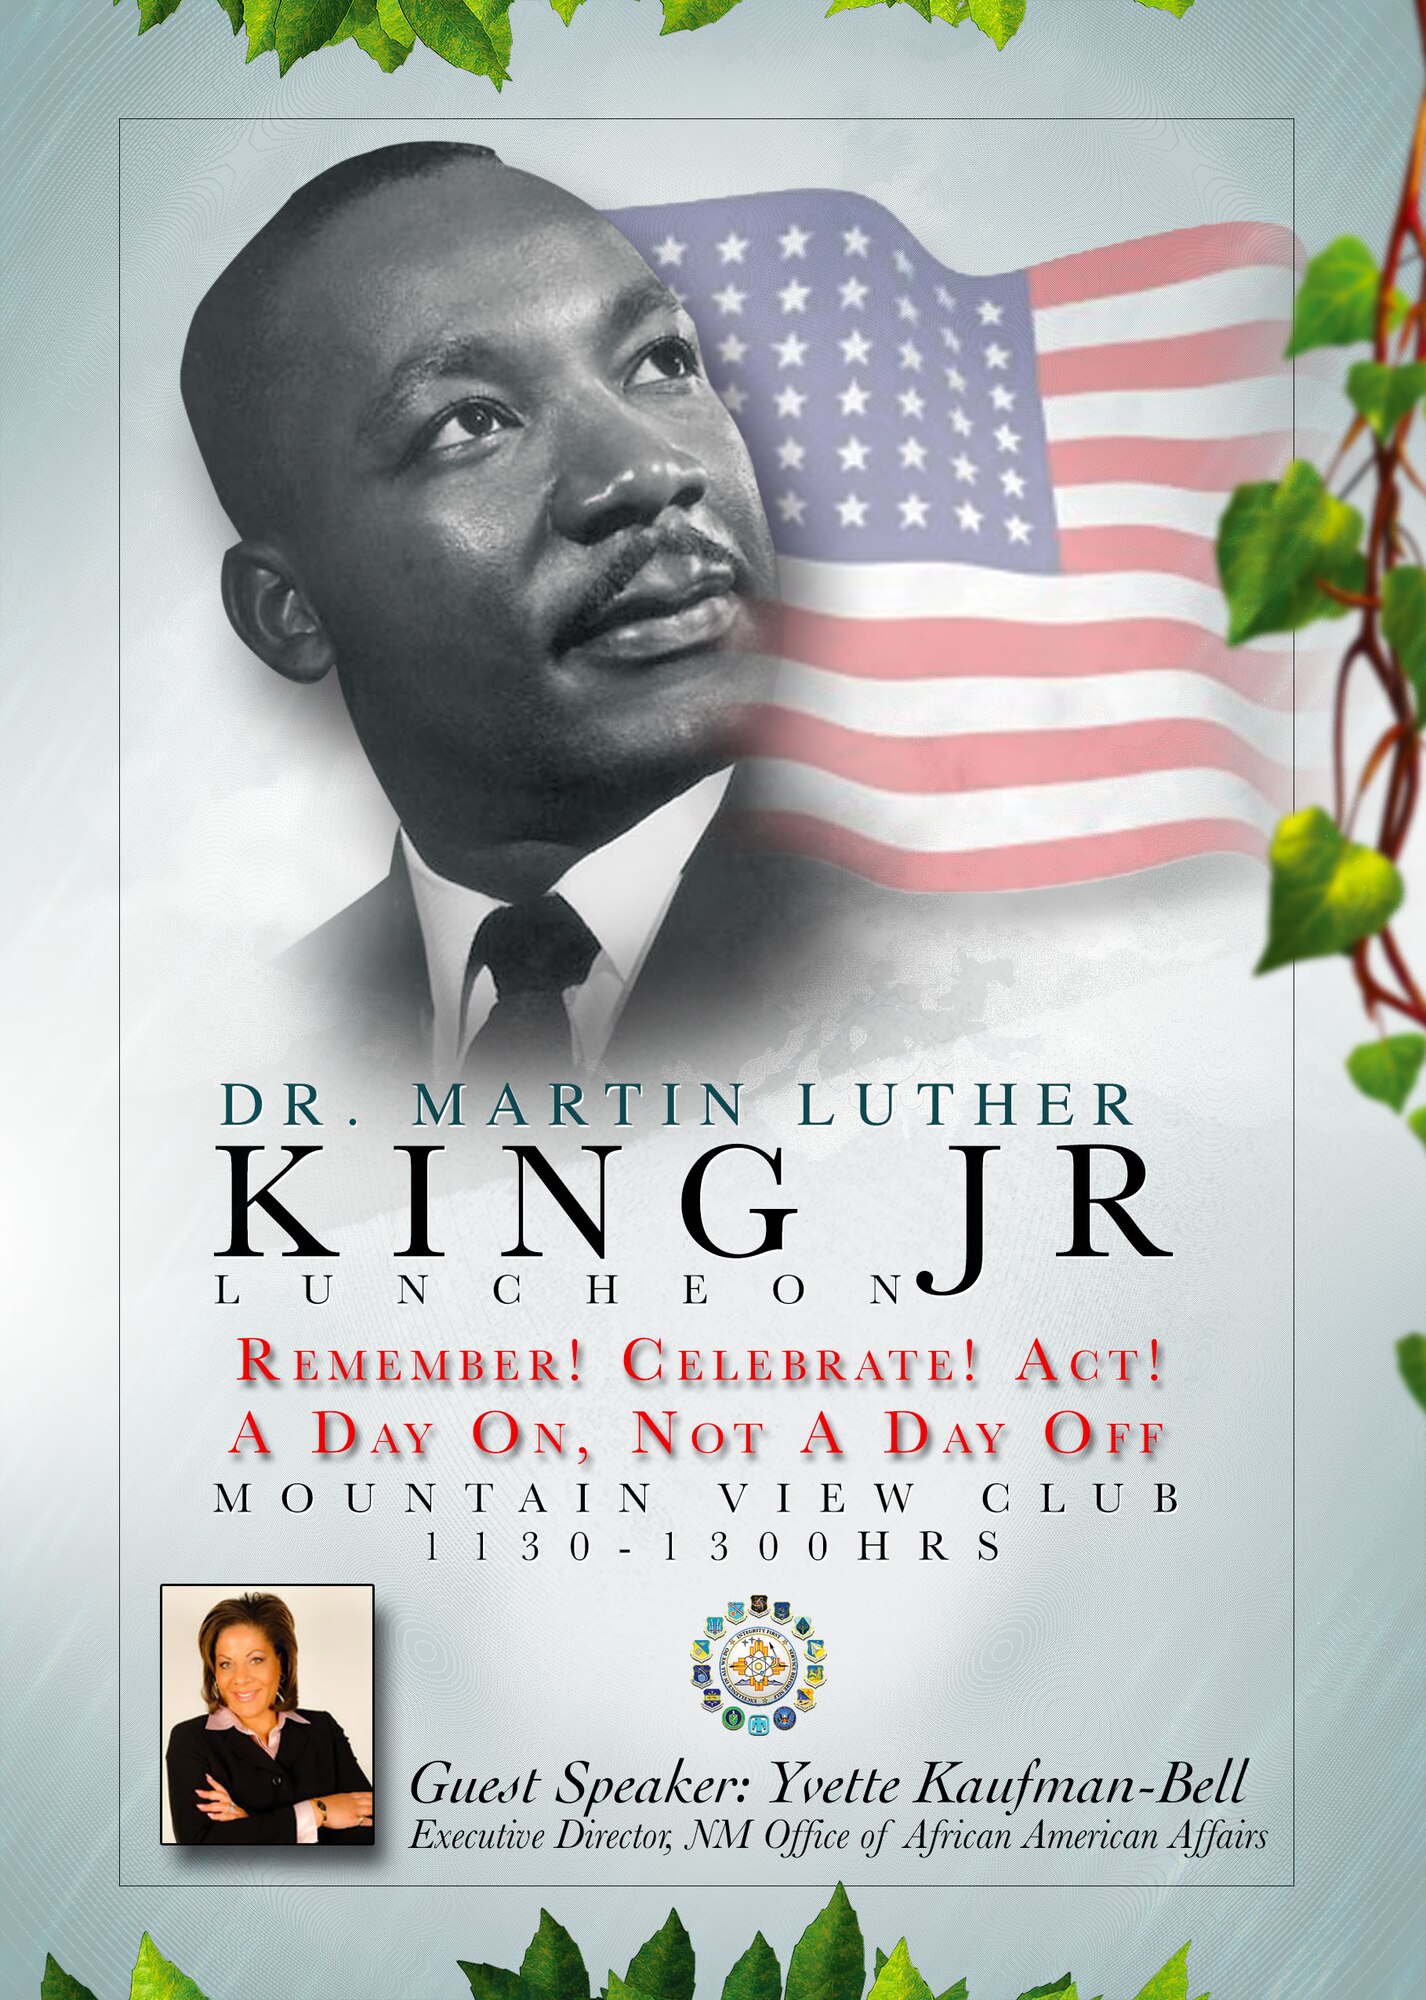 Dr. Martin Luther King Jr. Holiday of Service